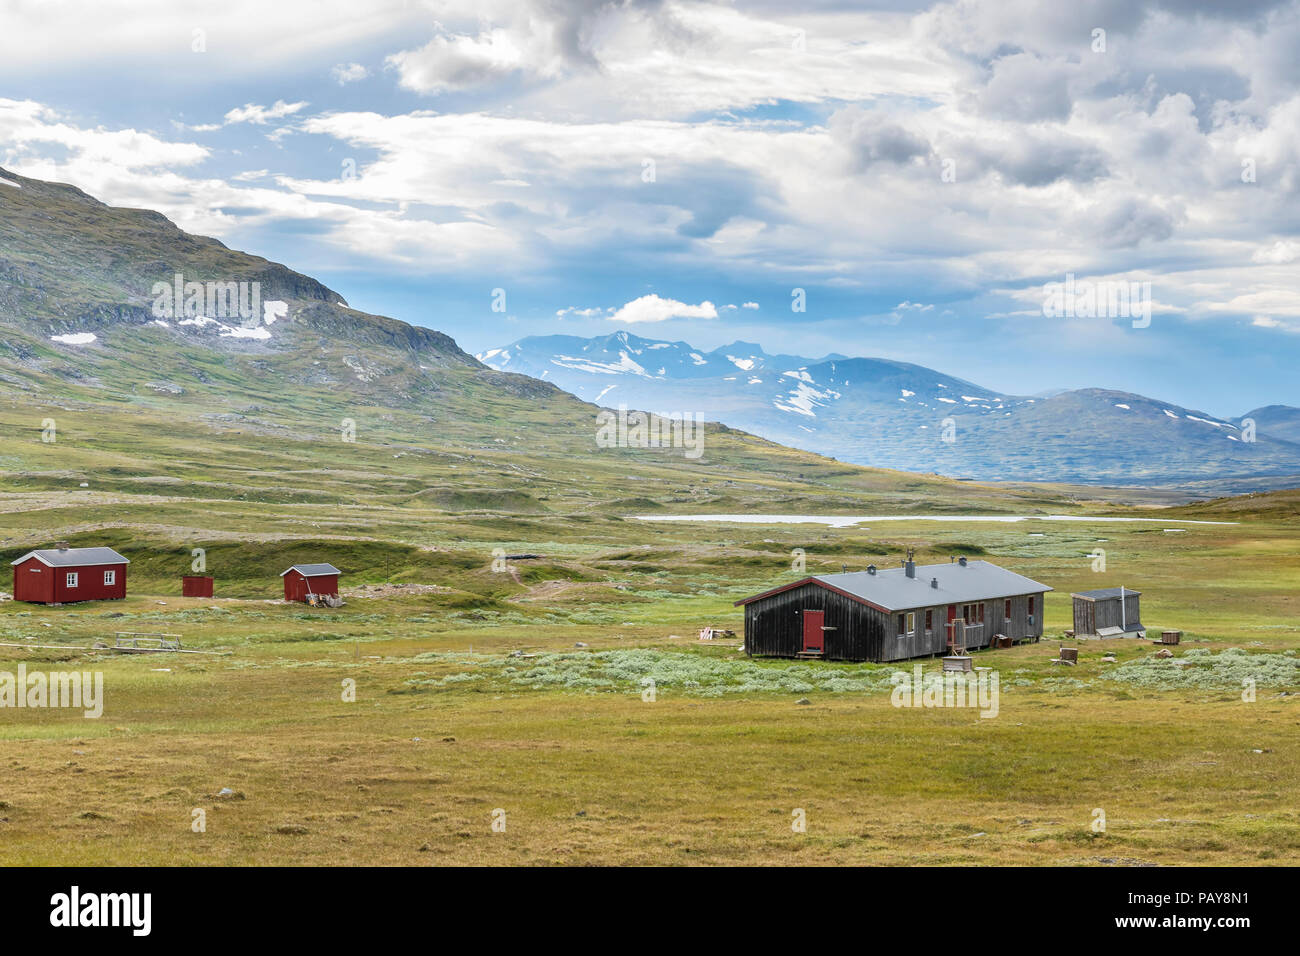 Helags mountain huts in the swedish mountains Stock Photo